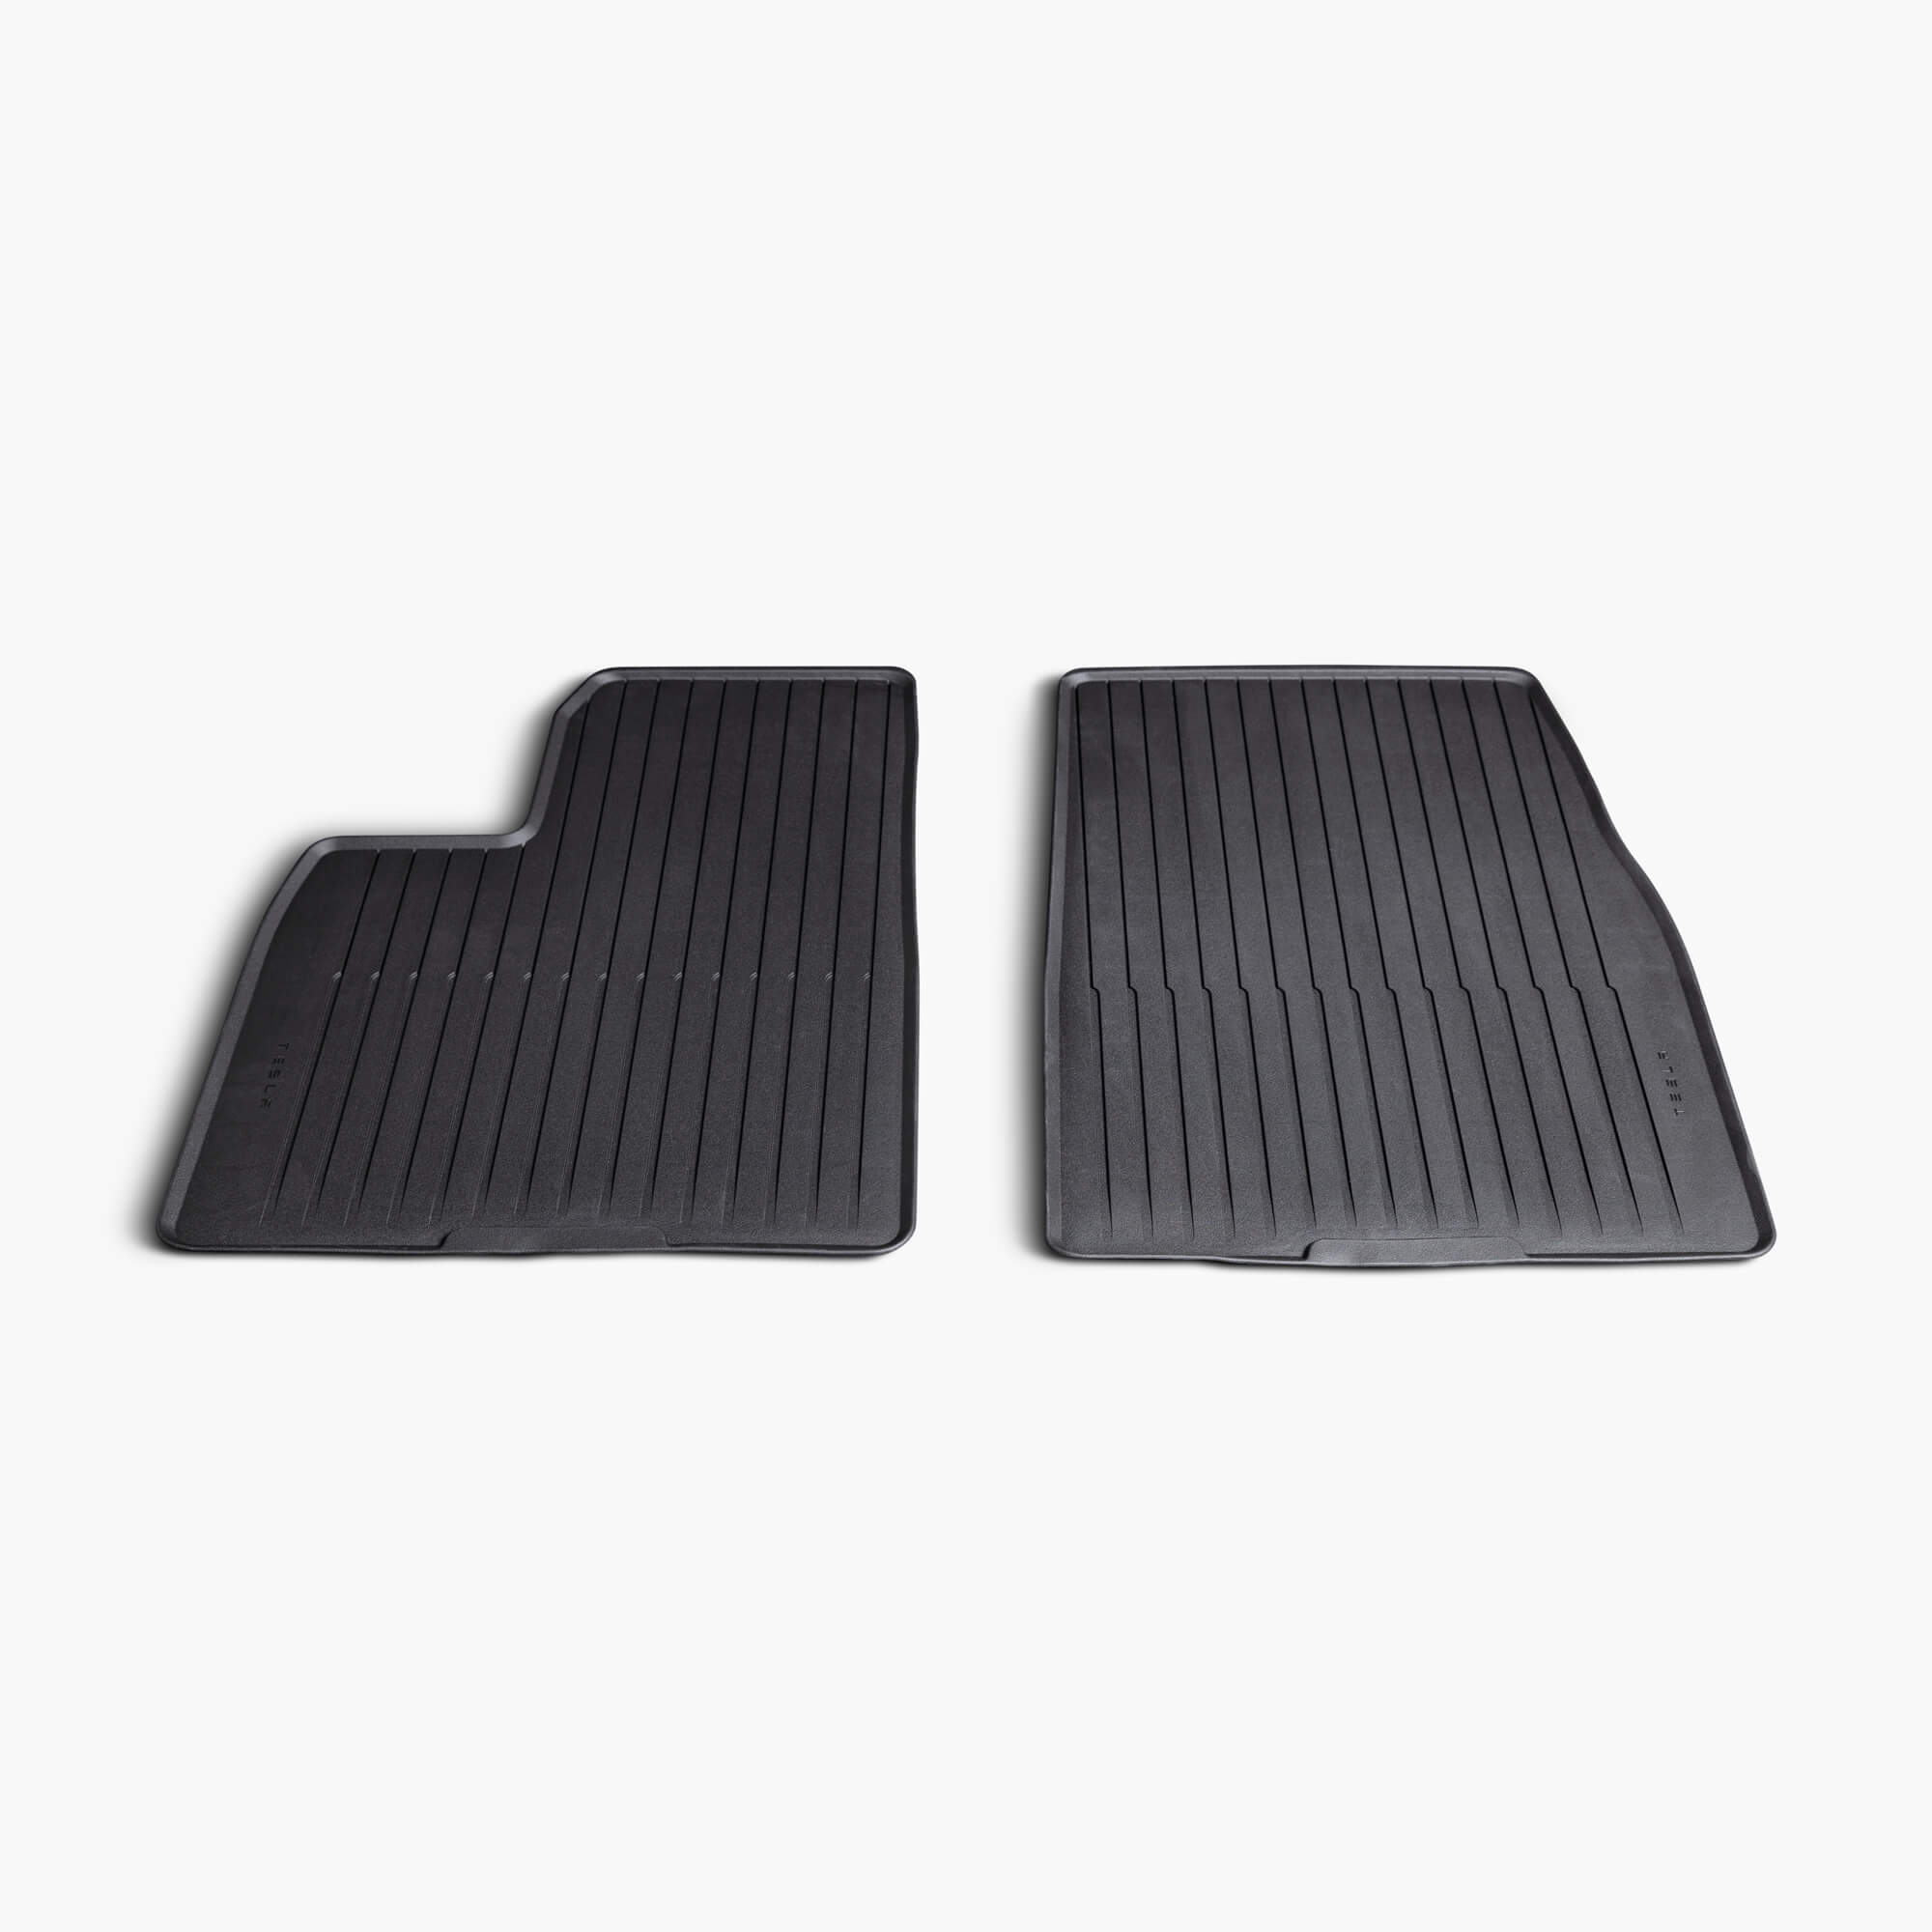 Model X All-Weather Interior Mats